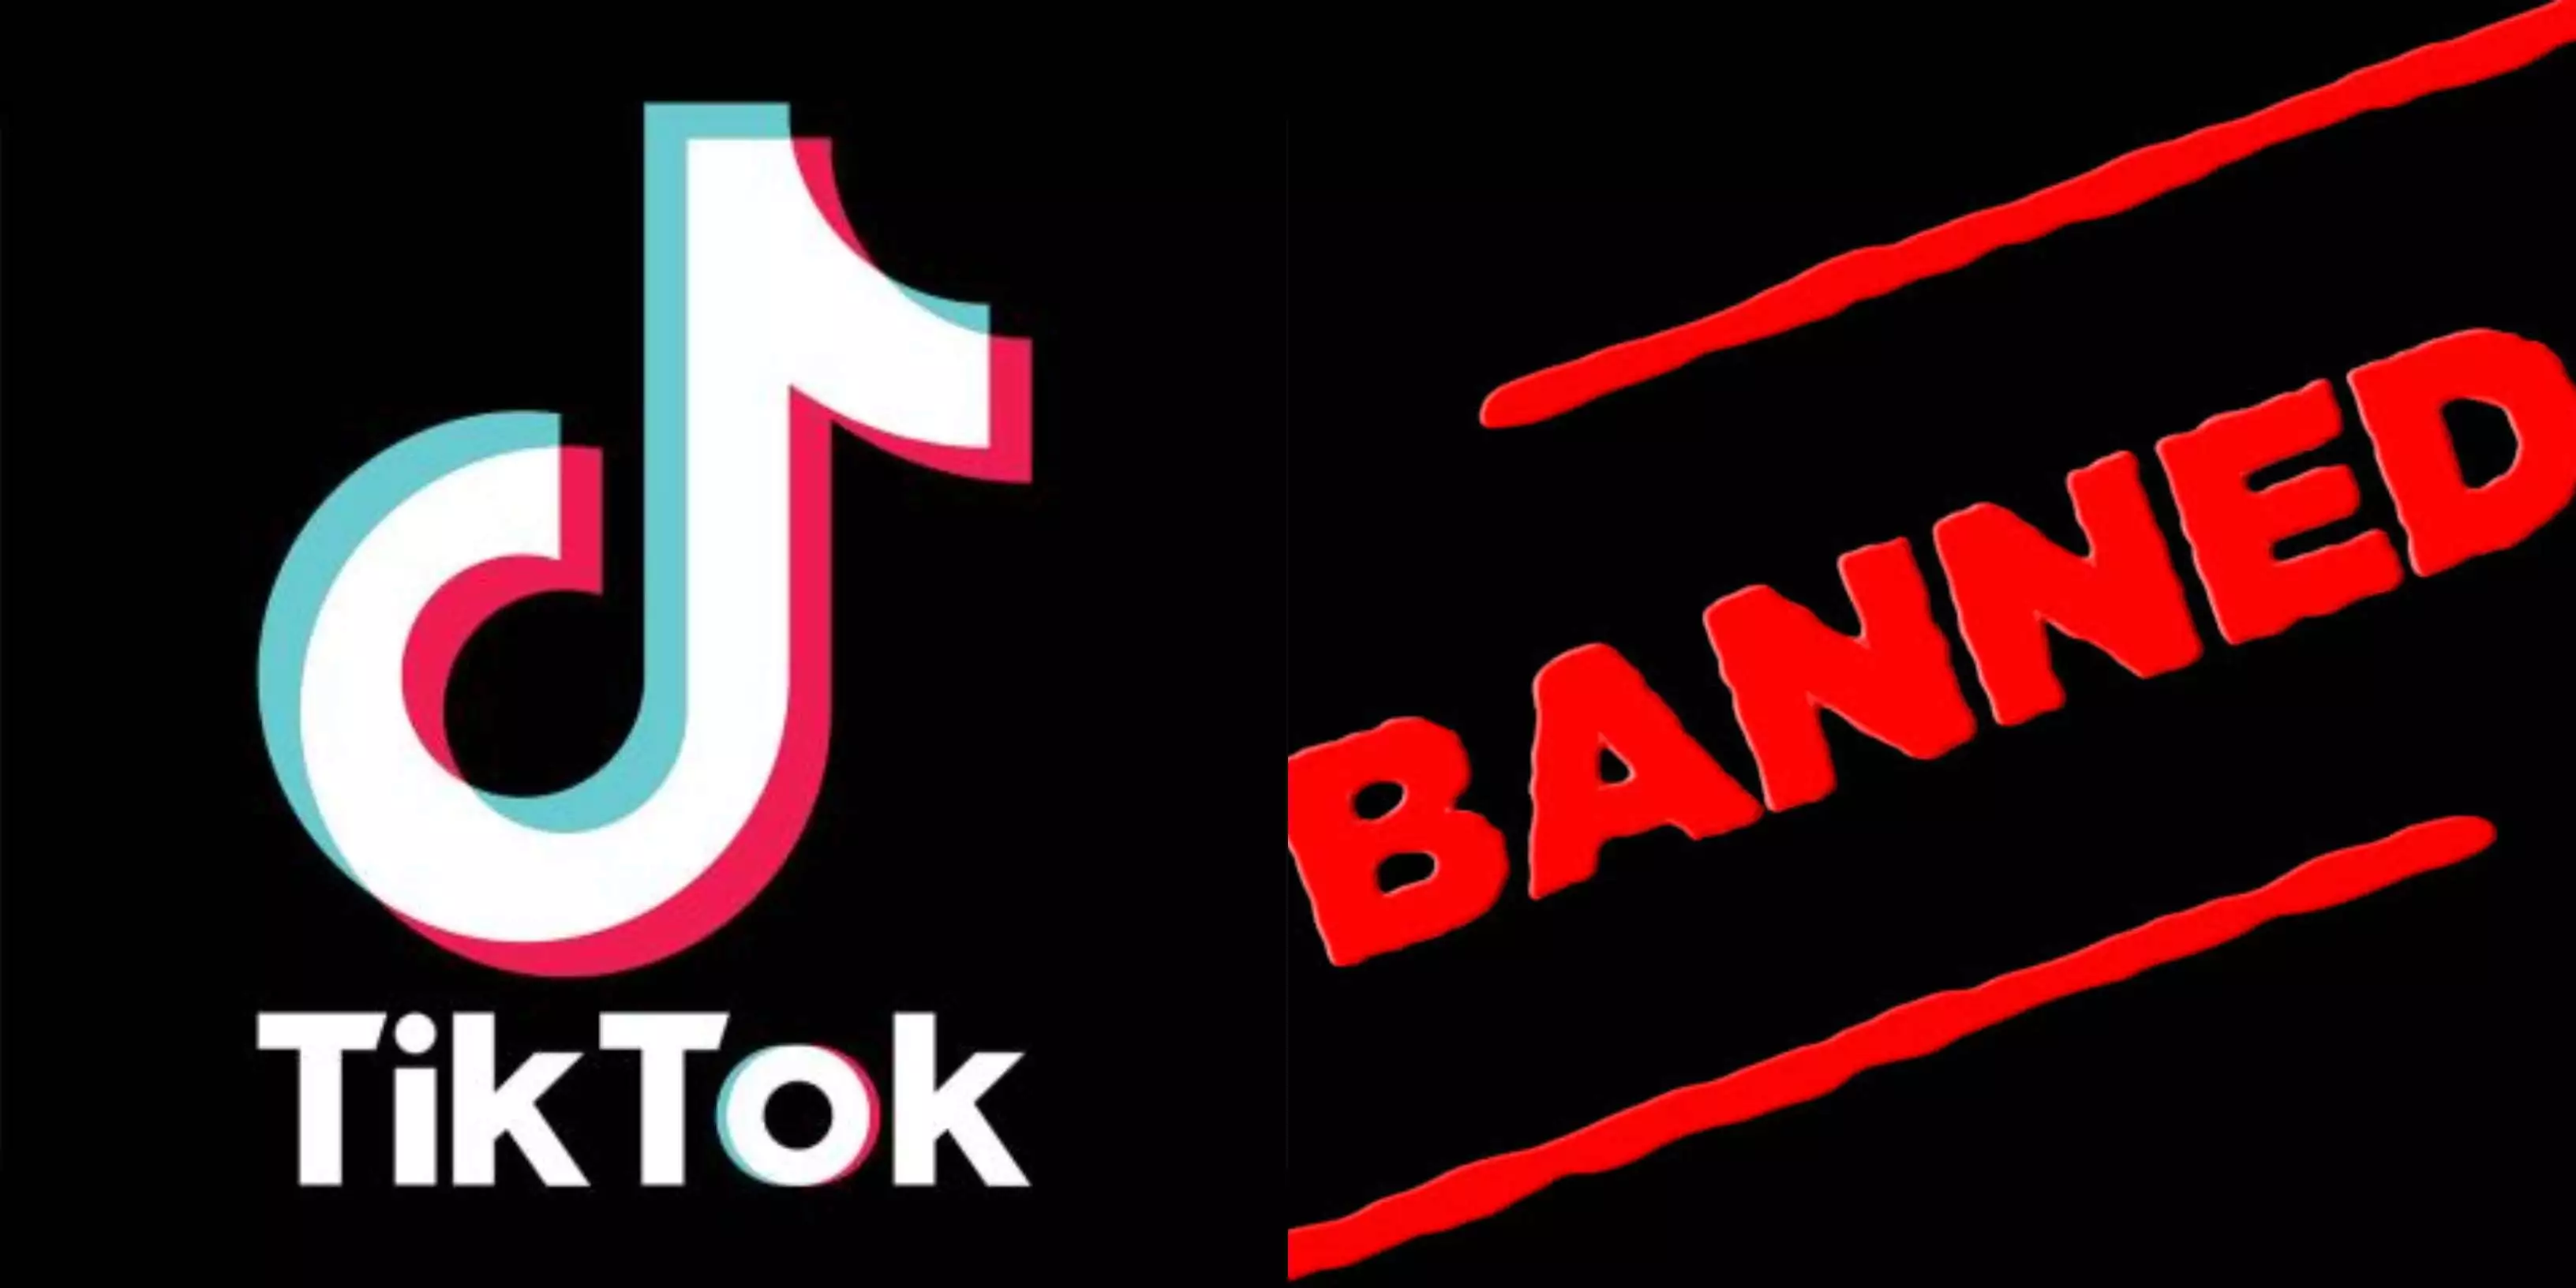 5 Countries That Have Banned TikTok